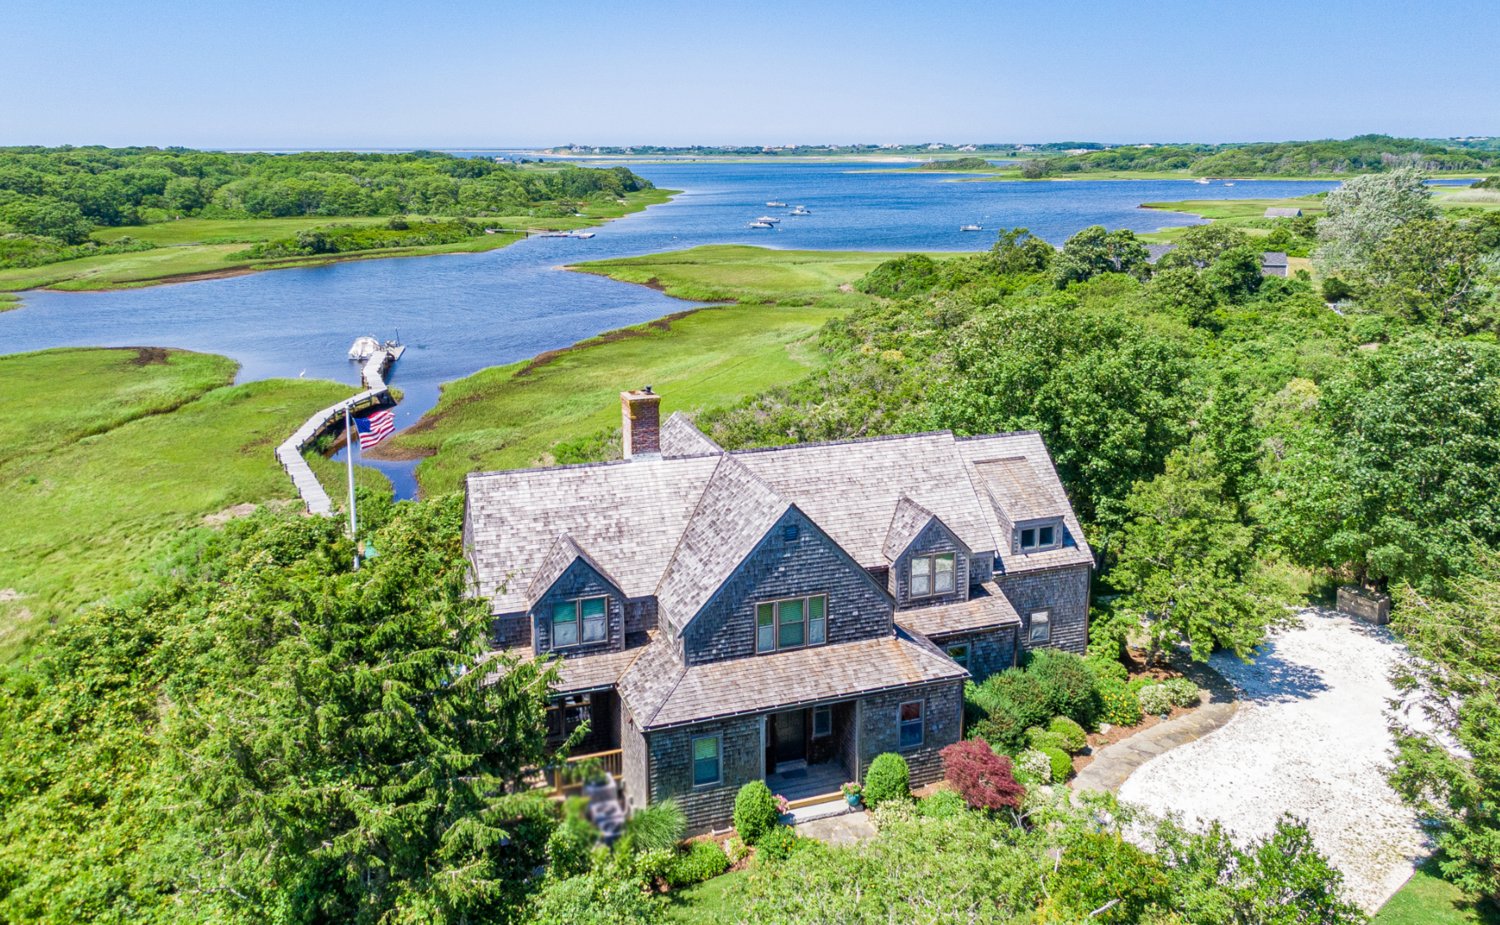 Located on 7.2 acres of picturesque land off Polpis Road, this four-bedroom, four-and-a-half-bathroom home has pristine water views.